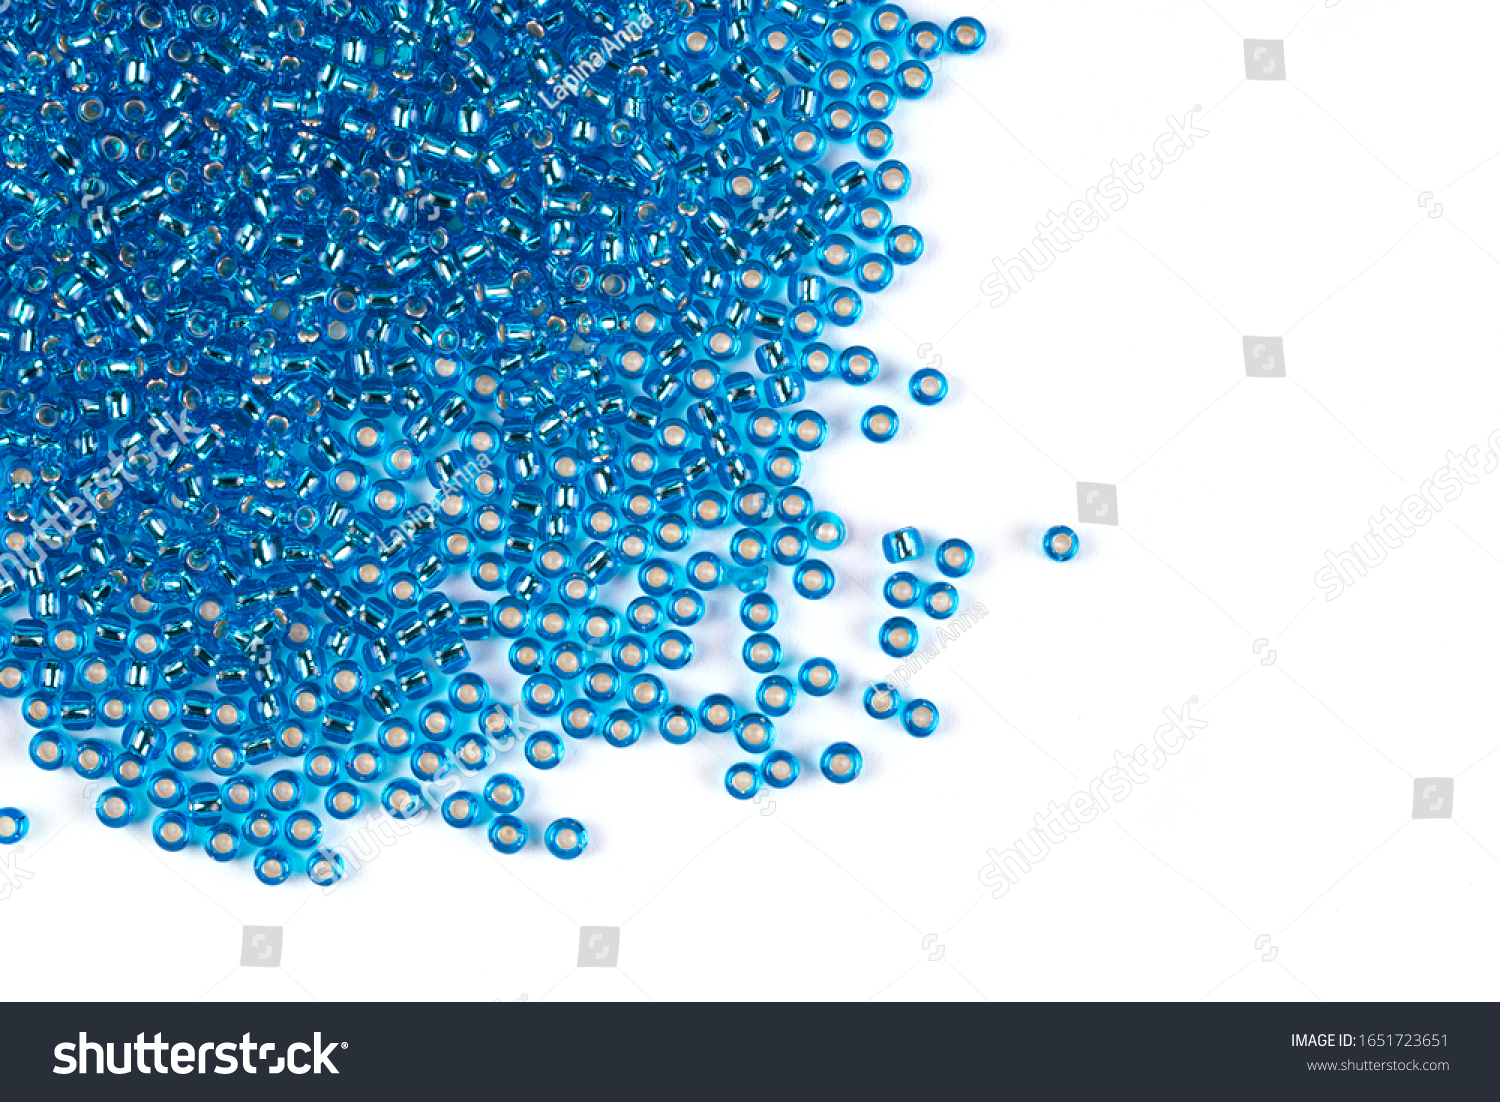 Blue beads scattered beads on a white background, top view, costume jewelry #1651723651